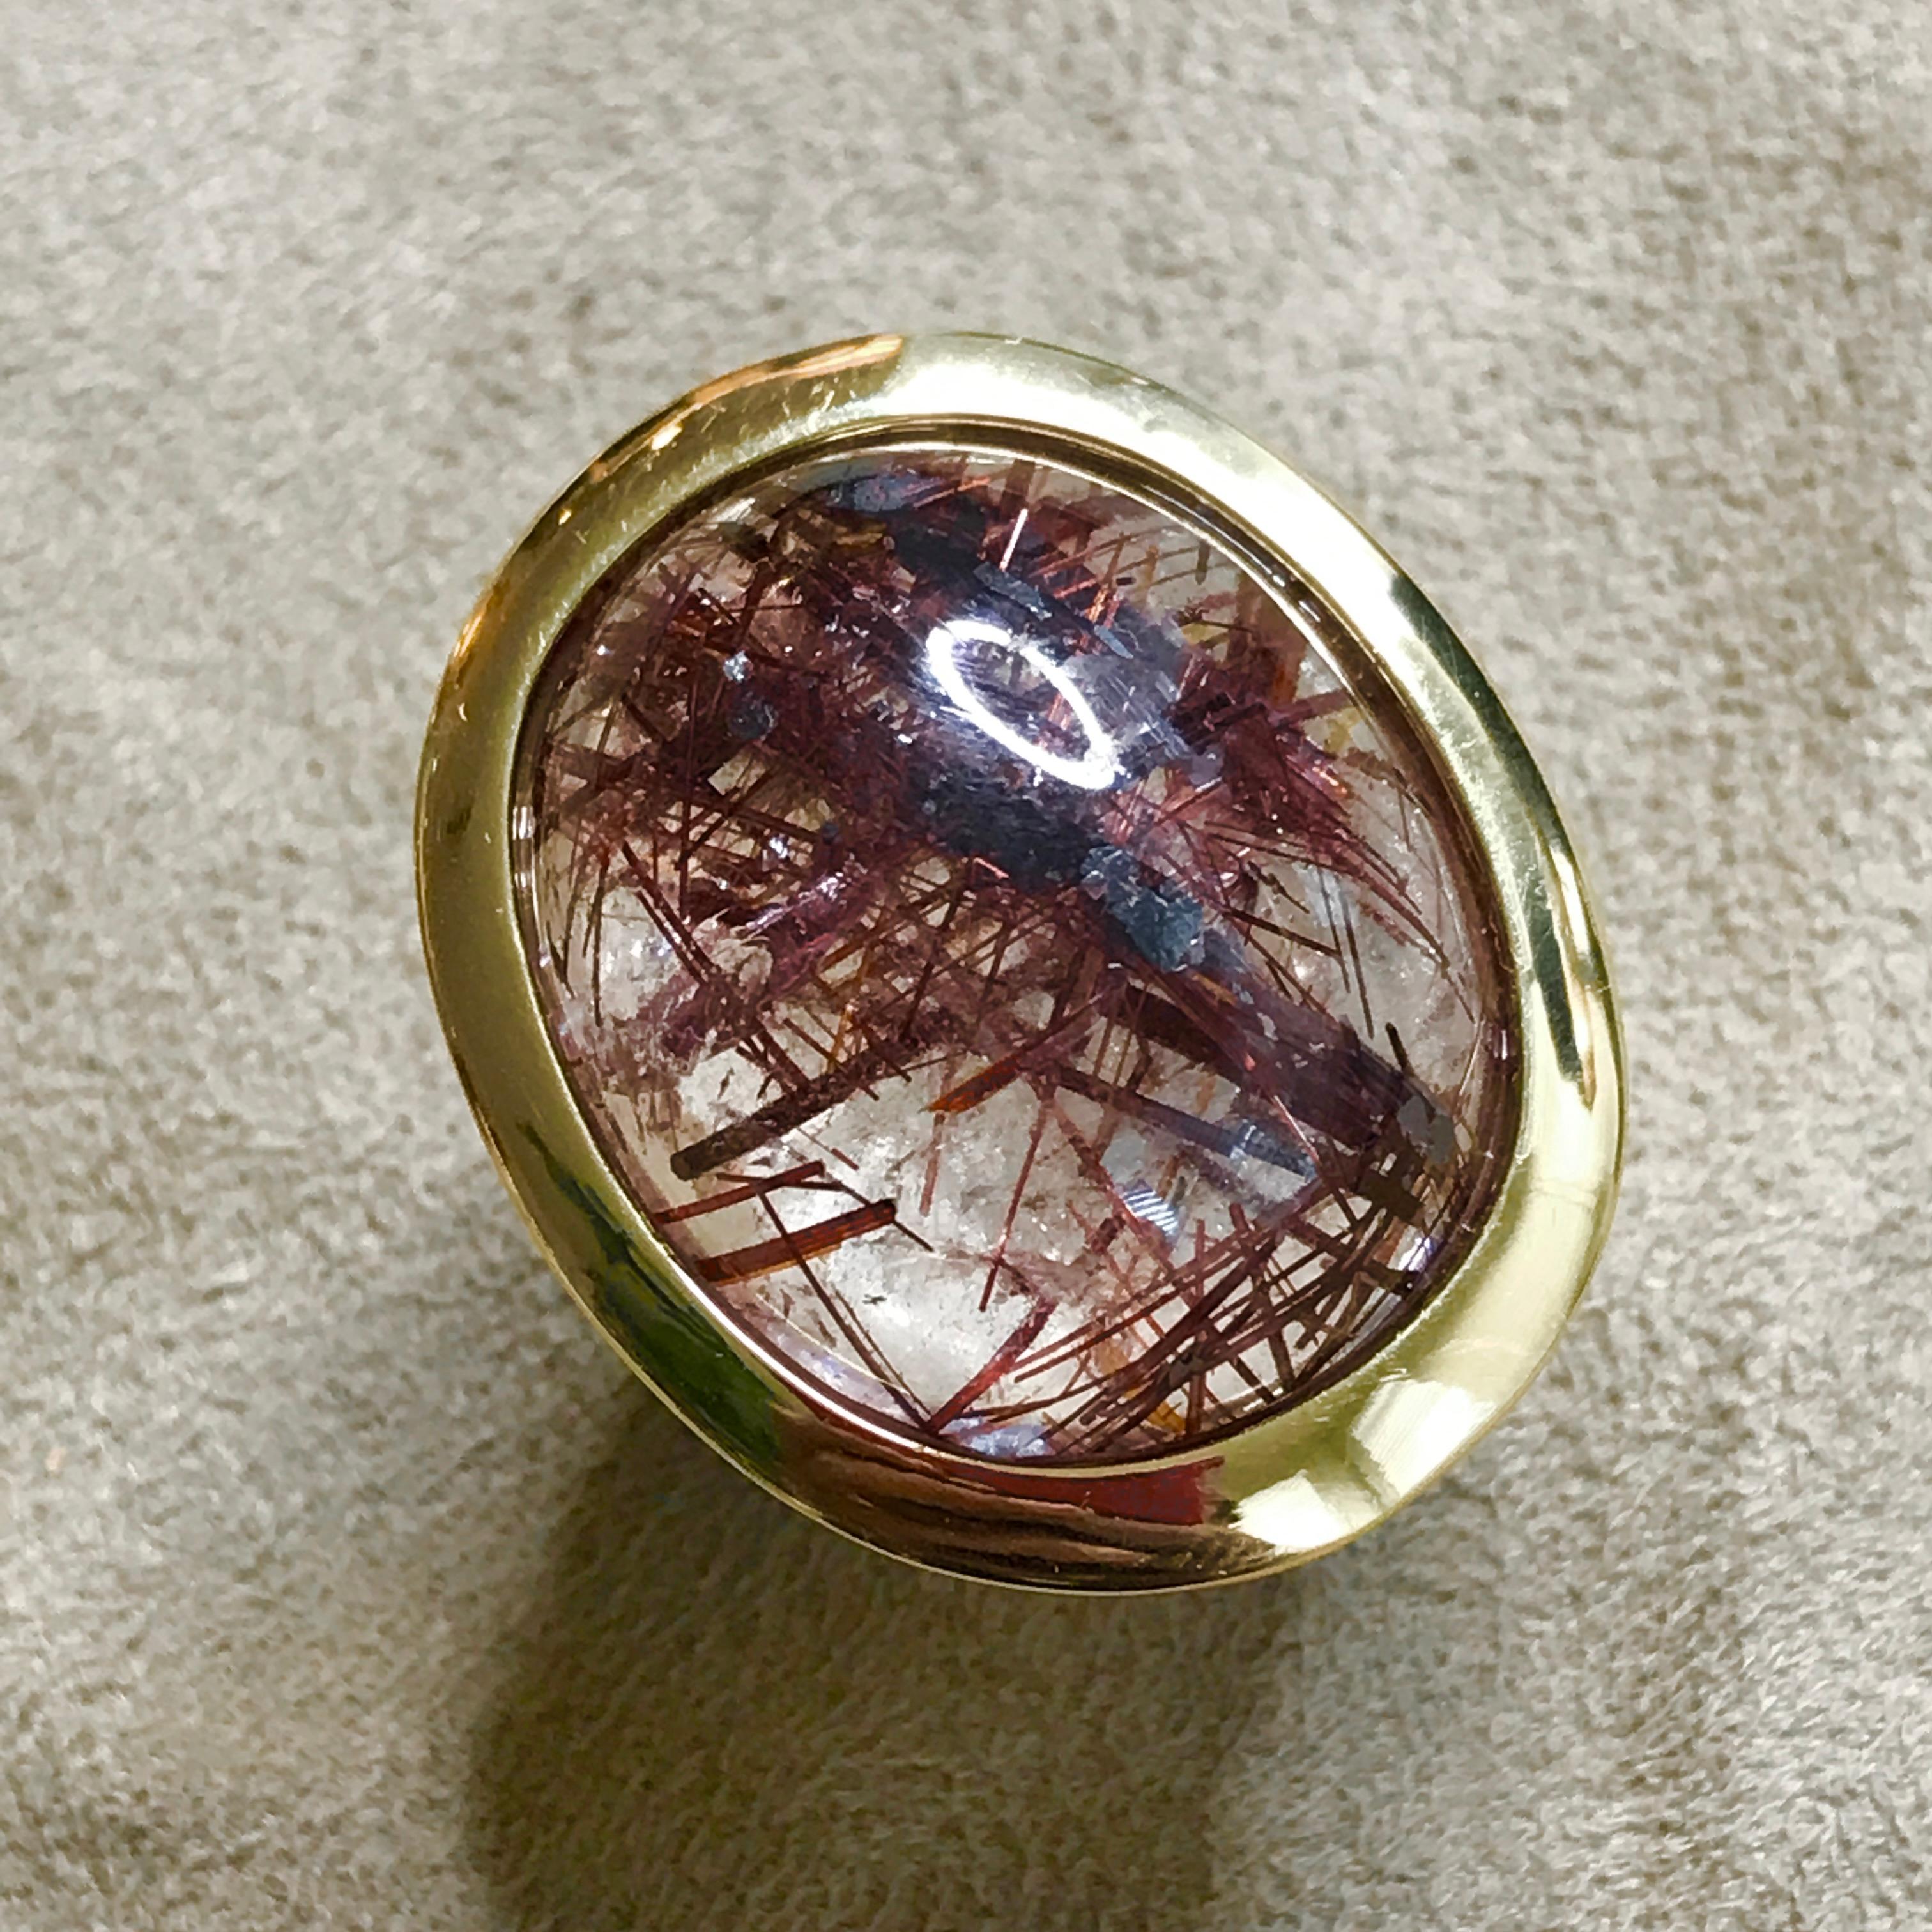 A wonderfully bold & striking ring made in Sterling Silver with a Gold plated 'top line' centring on a fabulous, large Rutile Quartz gemstone.

Rutile Quartz is a glorious stone - the naturally occurring inclusions which form the interwoven lines